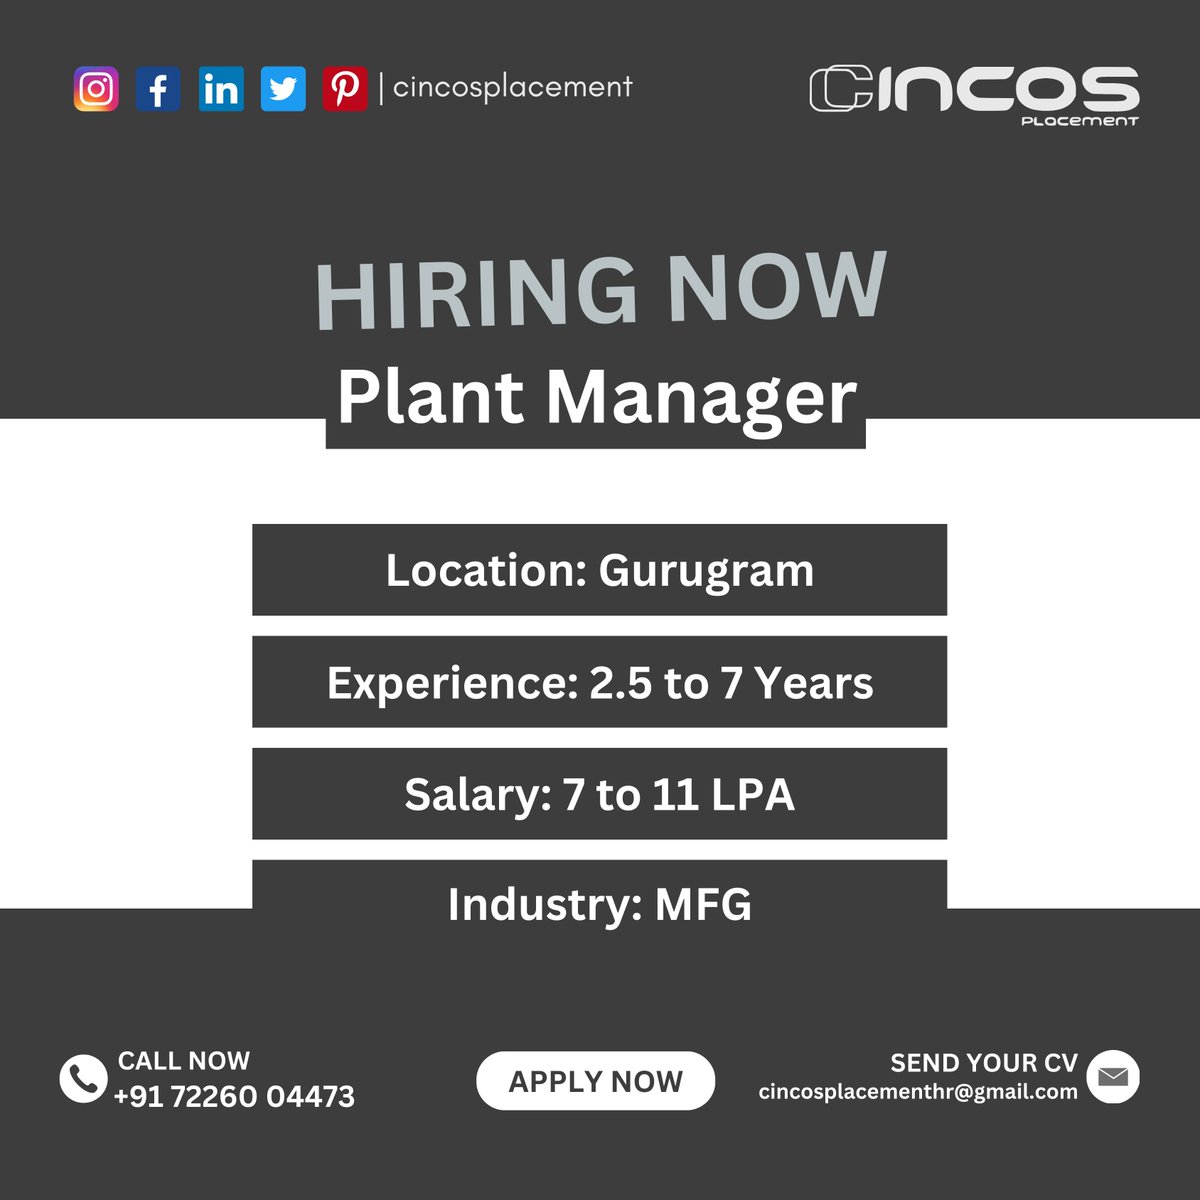 Exciting opportunity for a Plant Manager with the top Job Placement Consultancy in Gurugram.

Contact Us
Phone: +91 7226004473

#PlantManager #GurugramJobs #GrowthLeader #Job #BestJobPlacementInGurugram #PlacementConsultantInGurugram